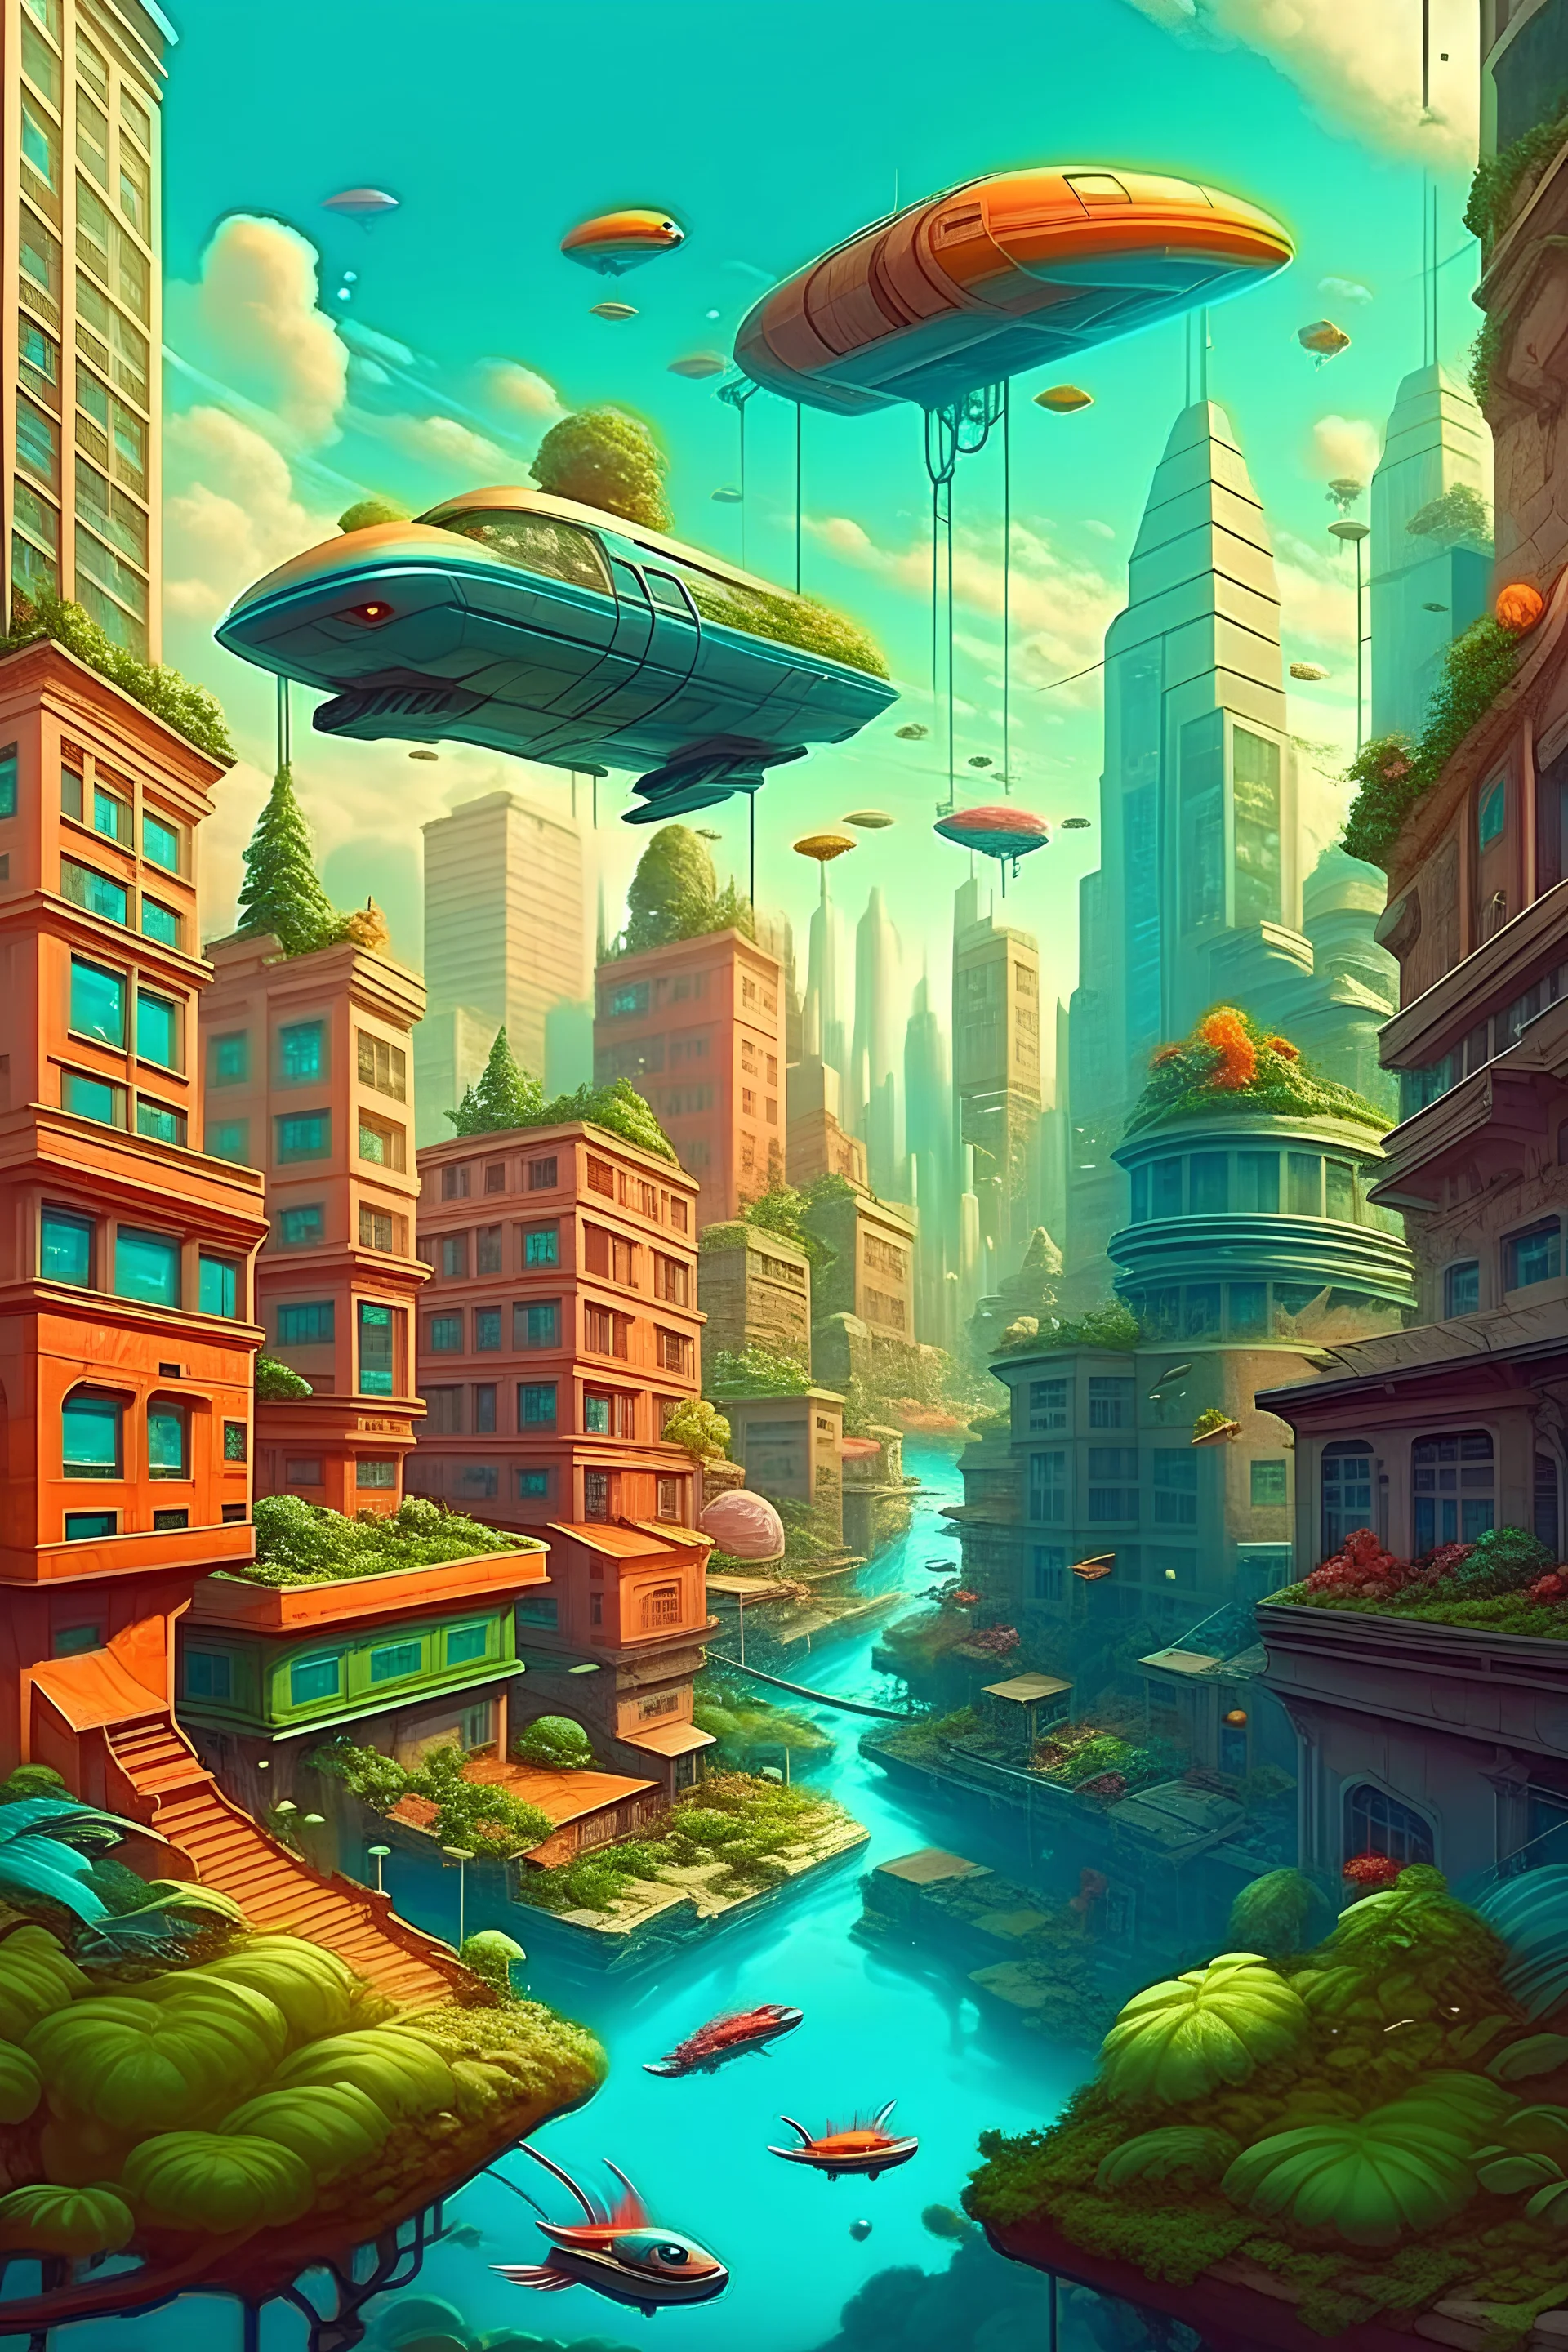 Dream city, color, flying cars, plants, animals